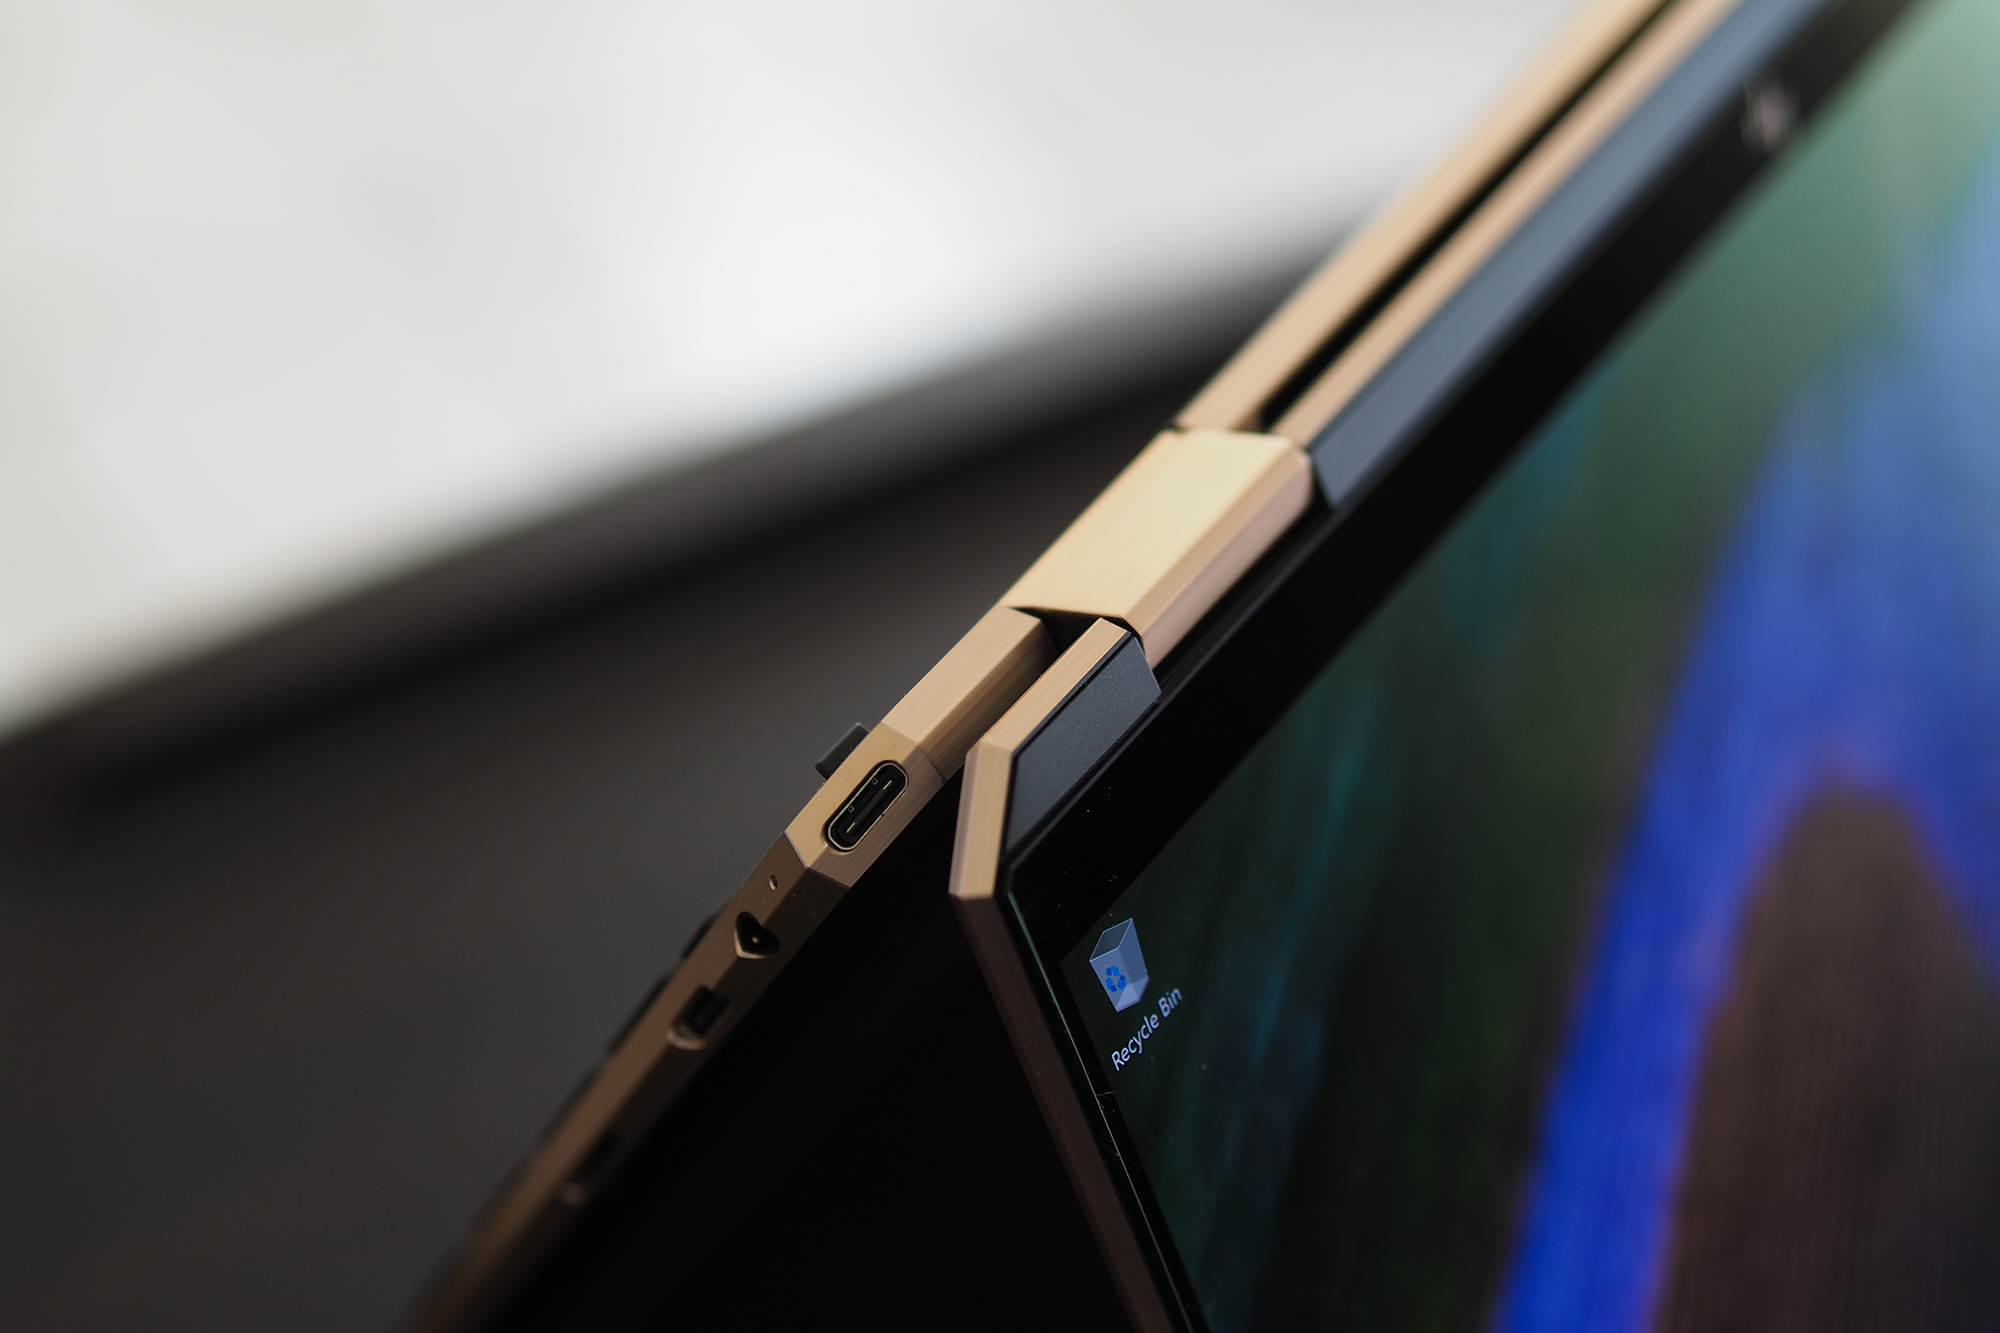 HP Spectre x360 14 Review: The 2-in-1 Convertible, Perfected